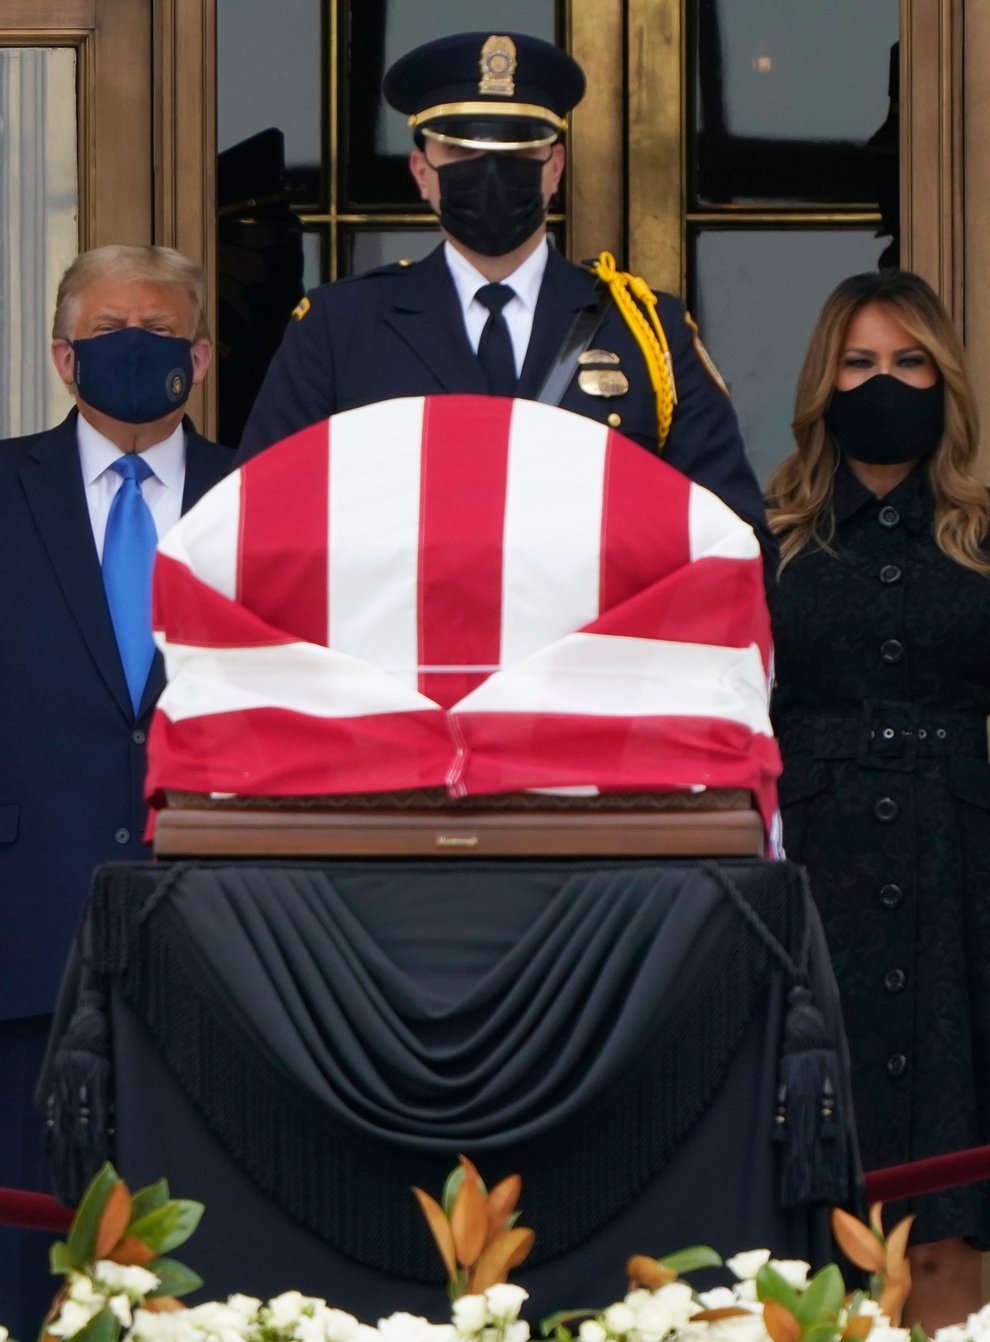 President Donald Trump and first lady Melania Trump pay respects as Justice Ruth Bader Ginsburg lies in repose at the Supreme Court